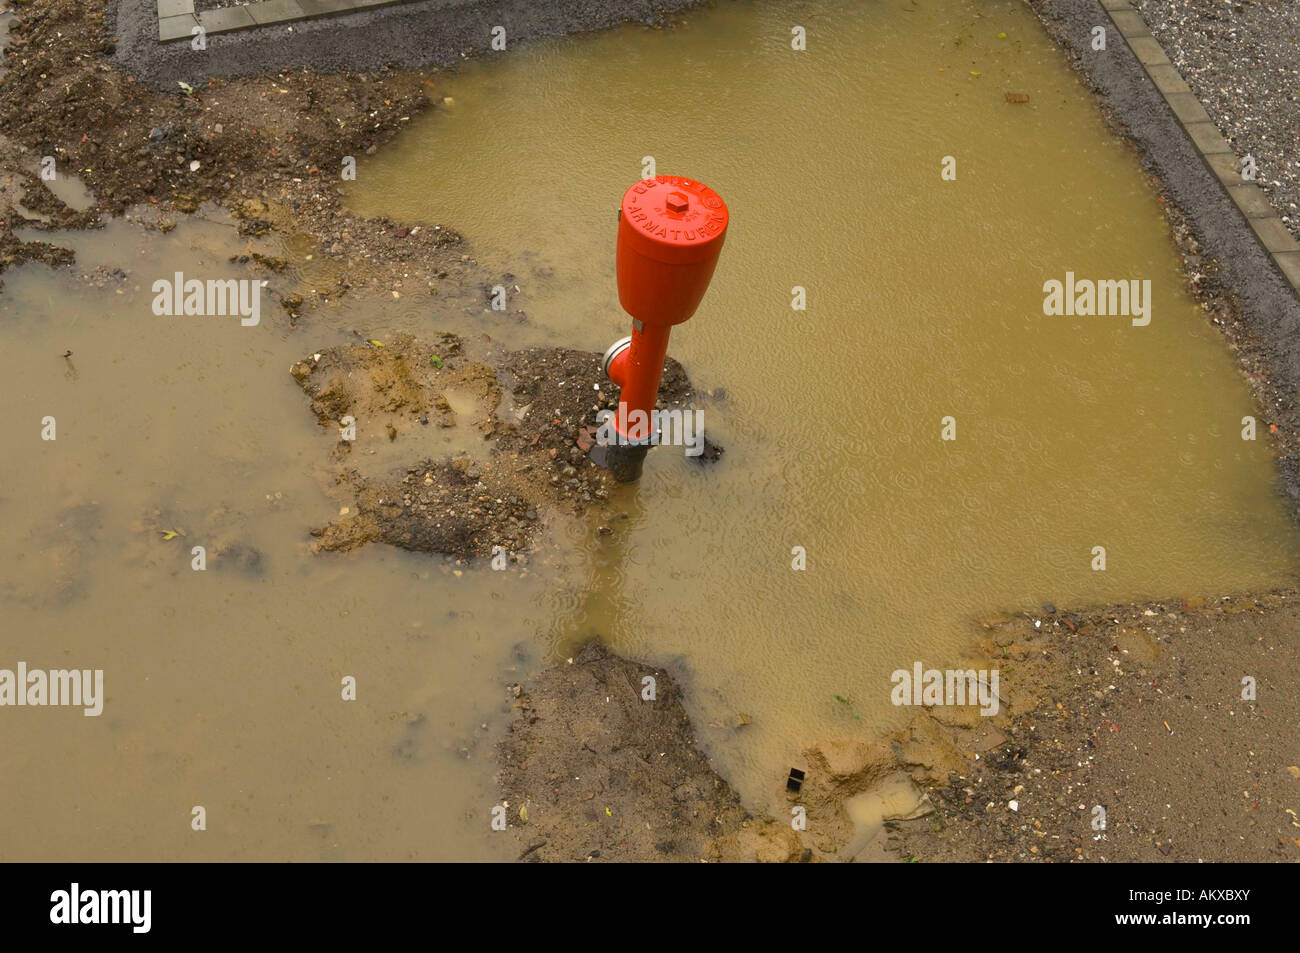 Fire hydrant in a puddle Stock Photo